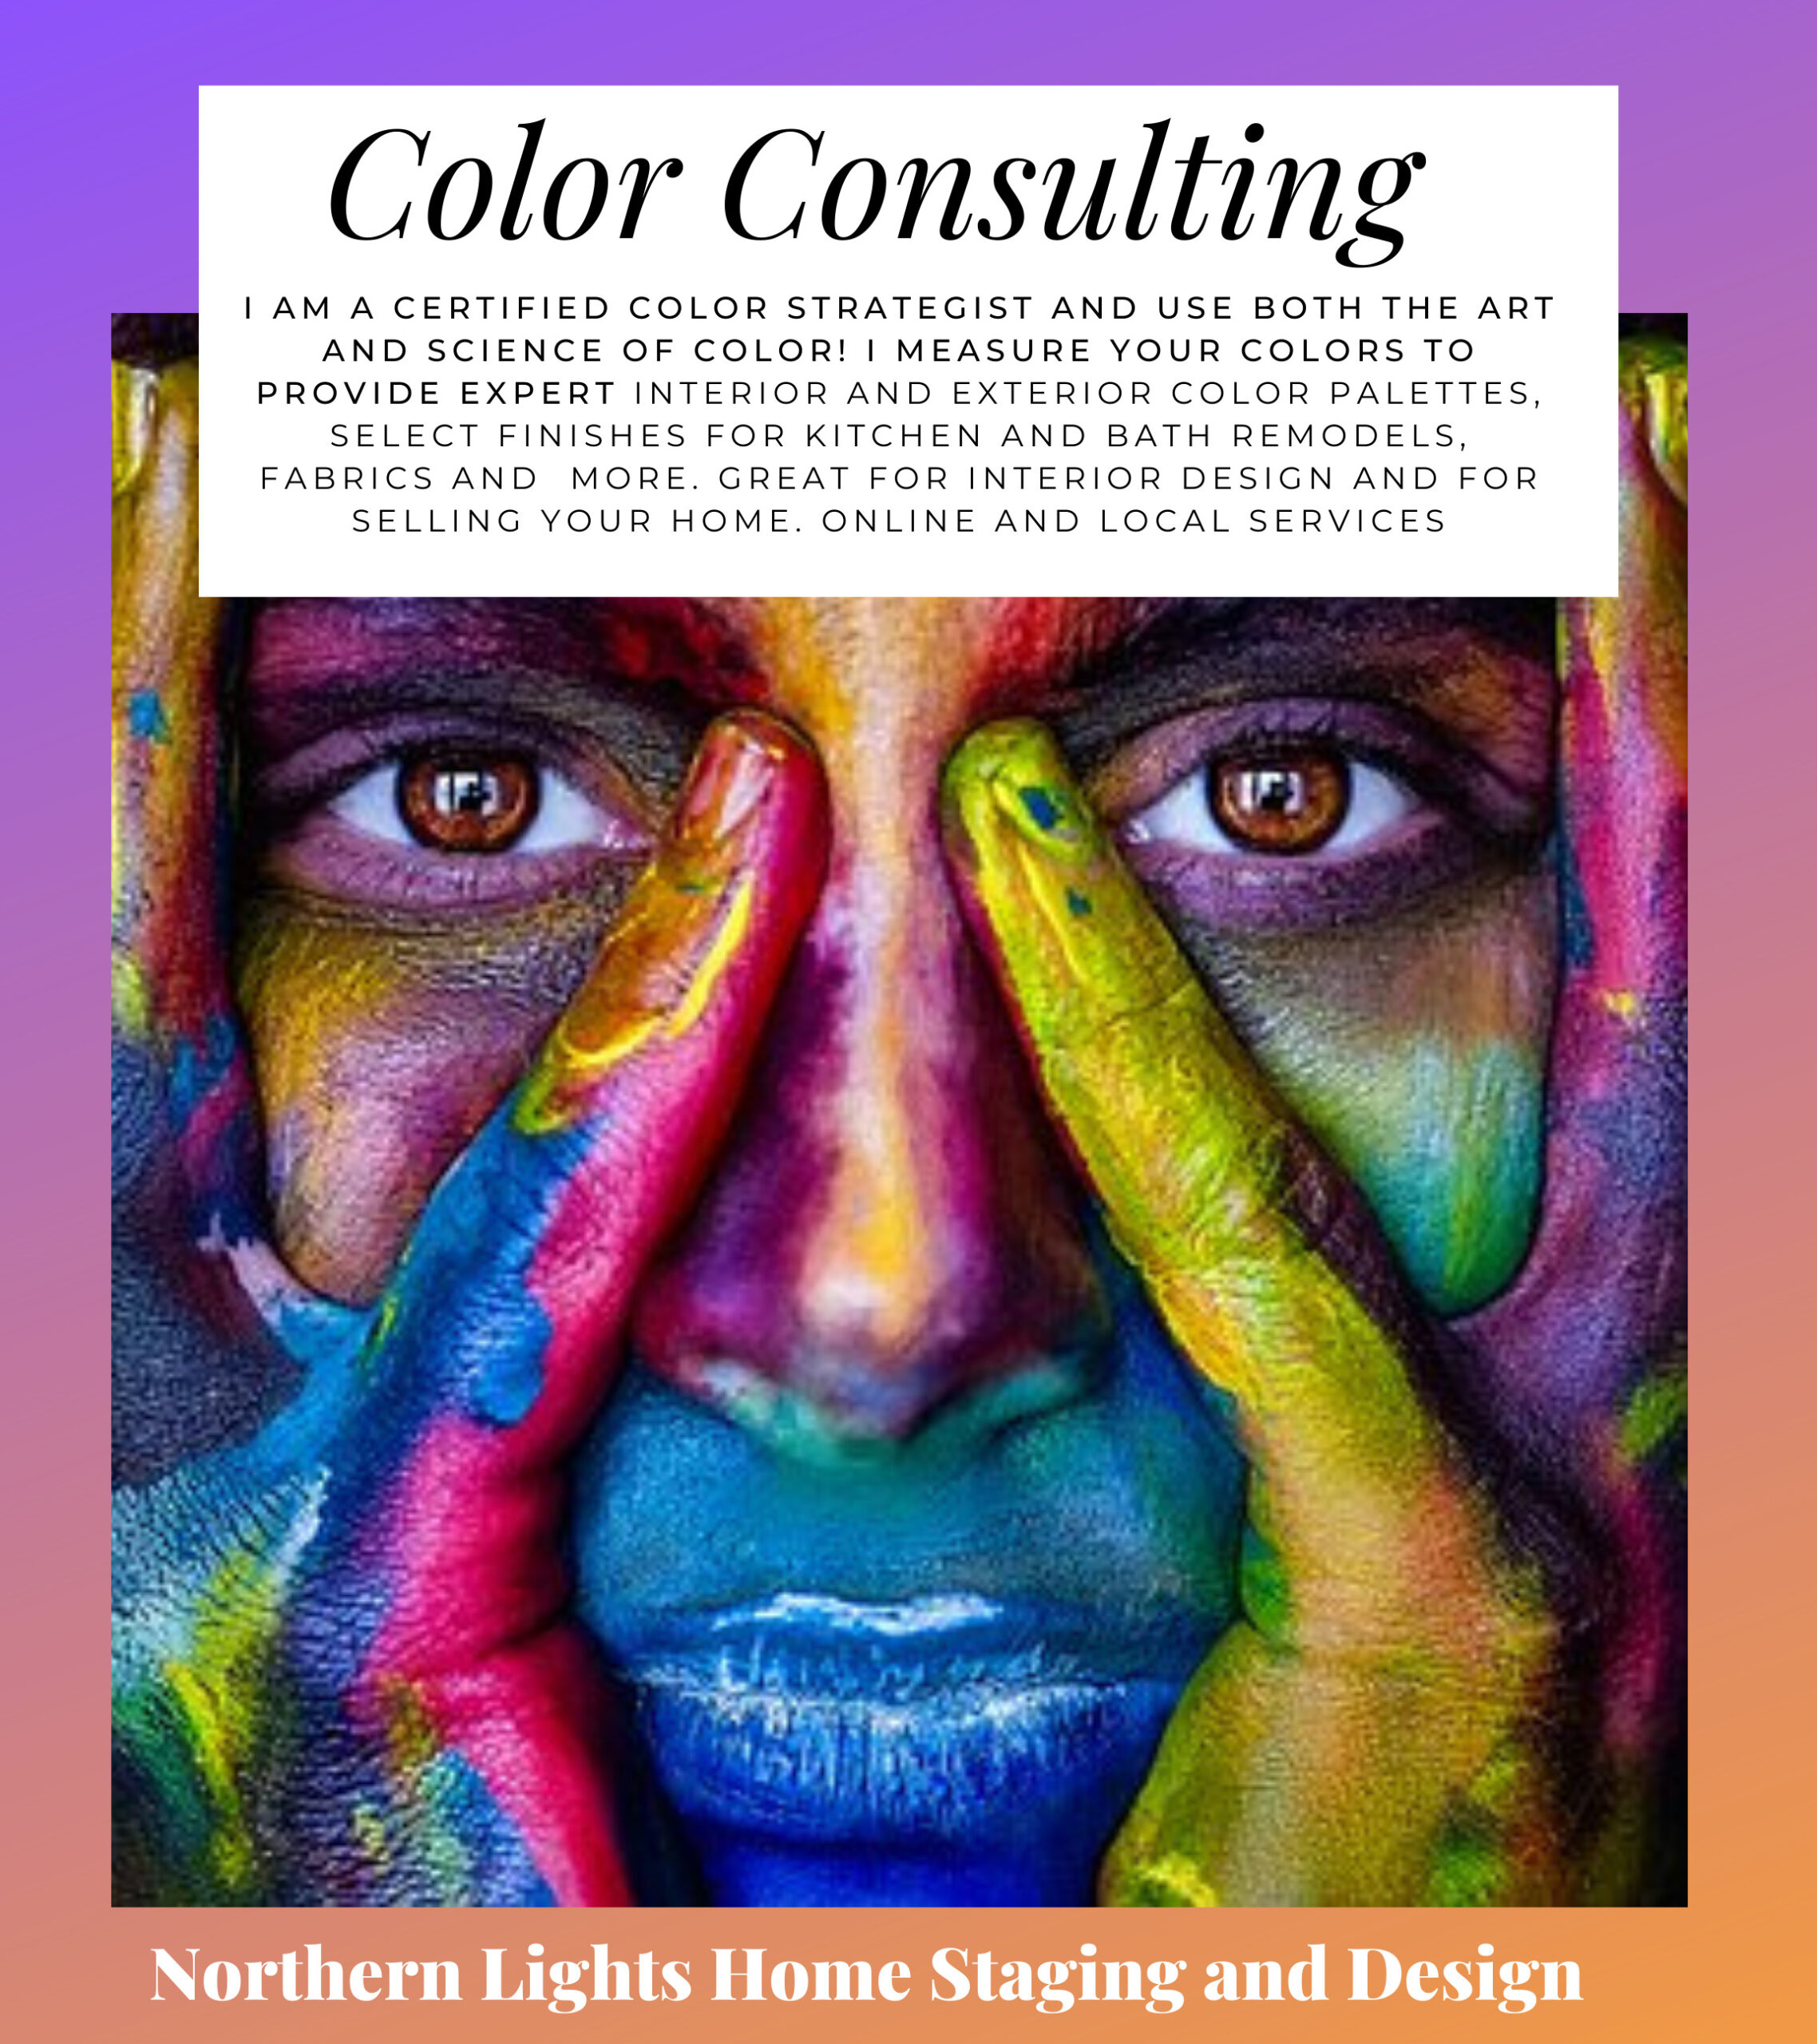 Not Your Average Color Consultation